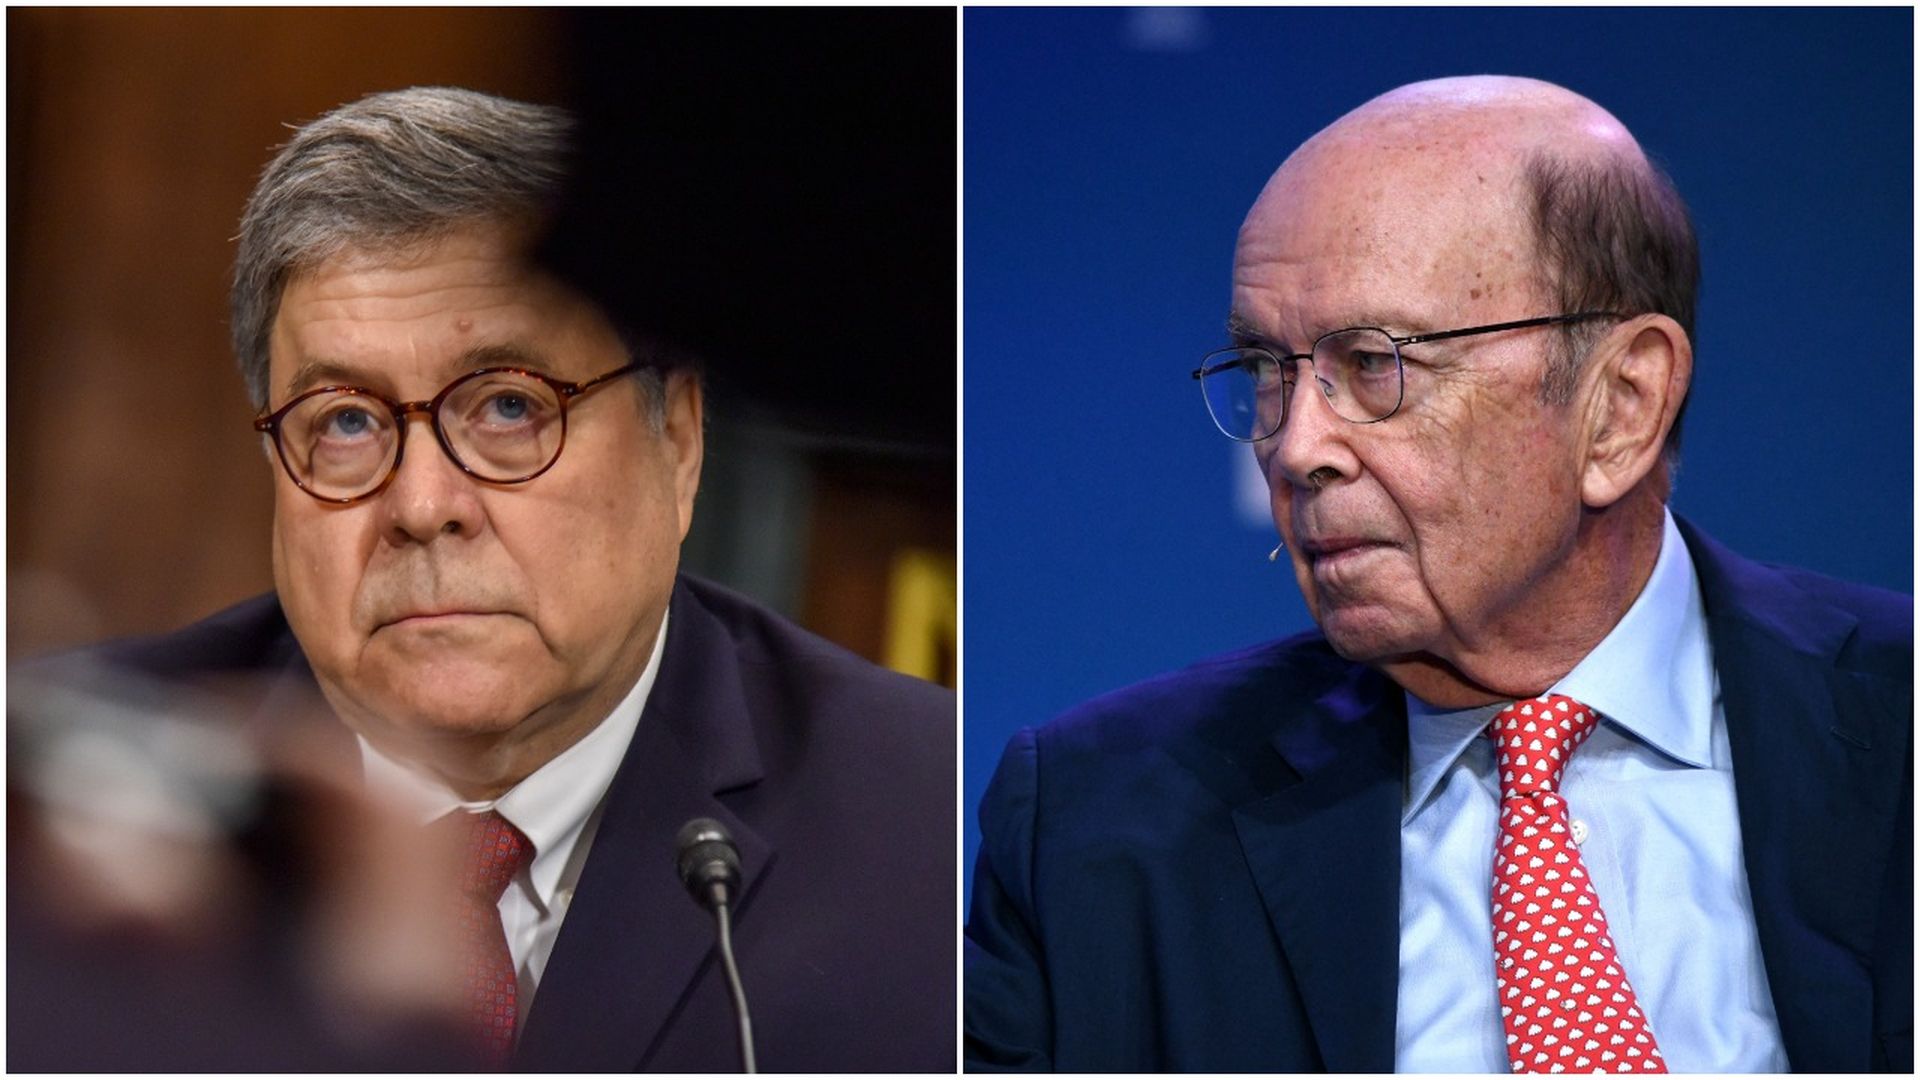 This image is a split screen of Bill Barr and Wilbur Ross.